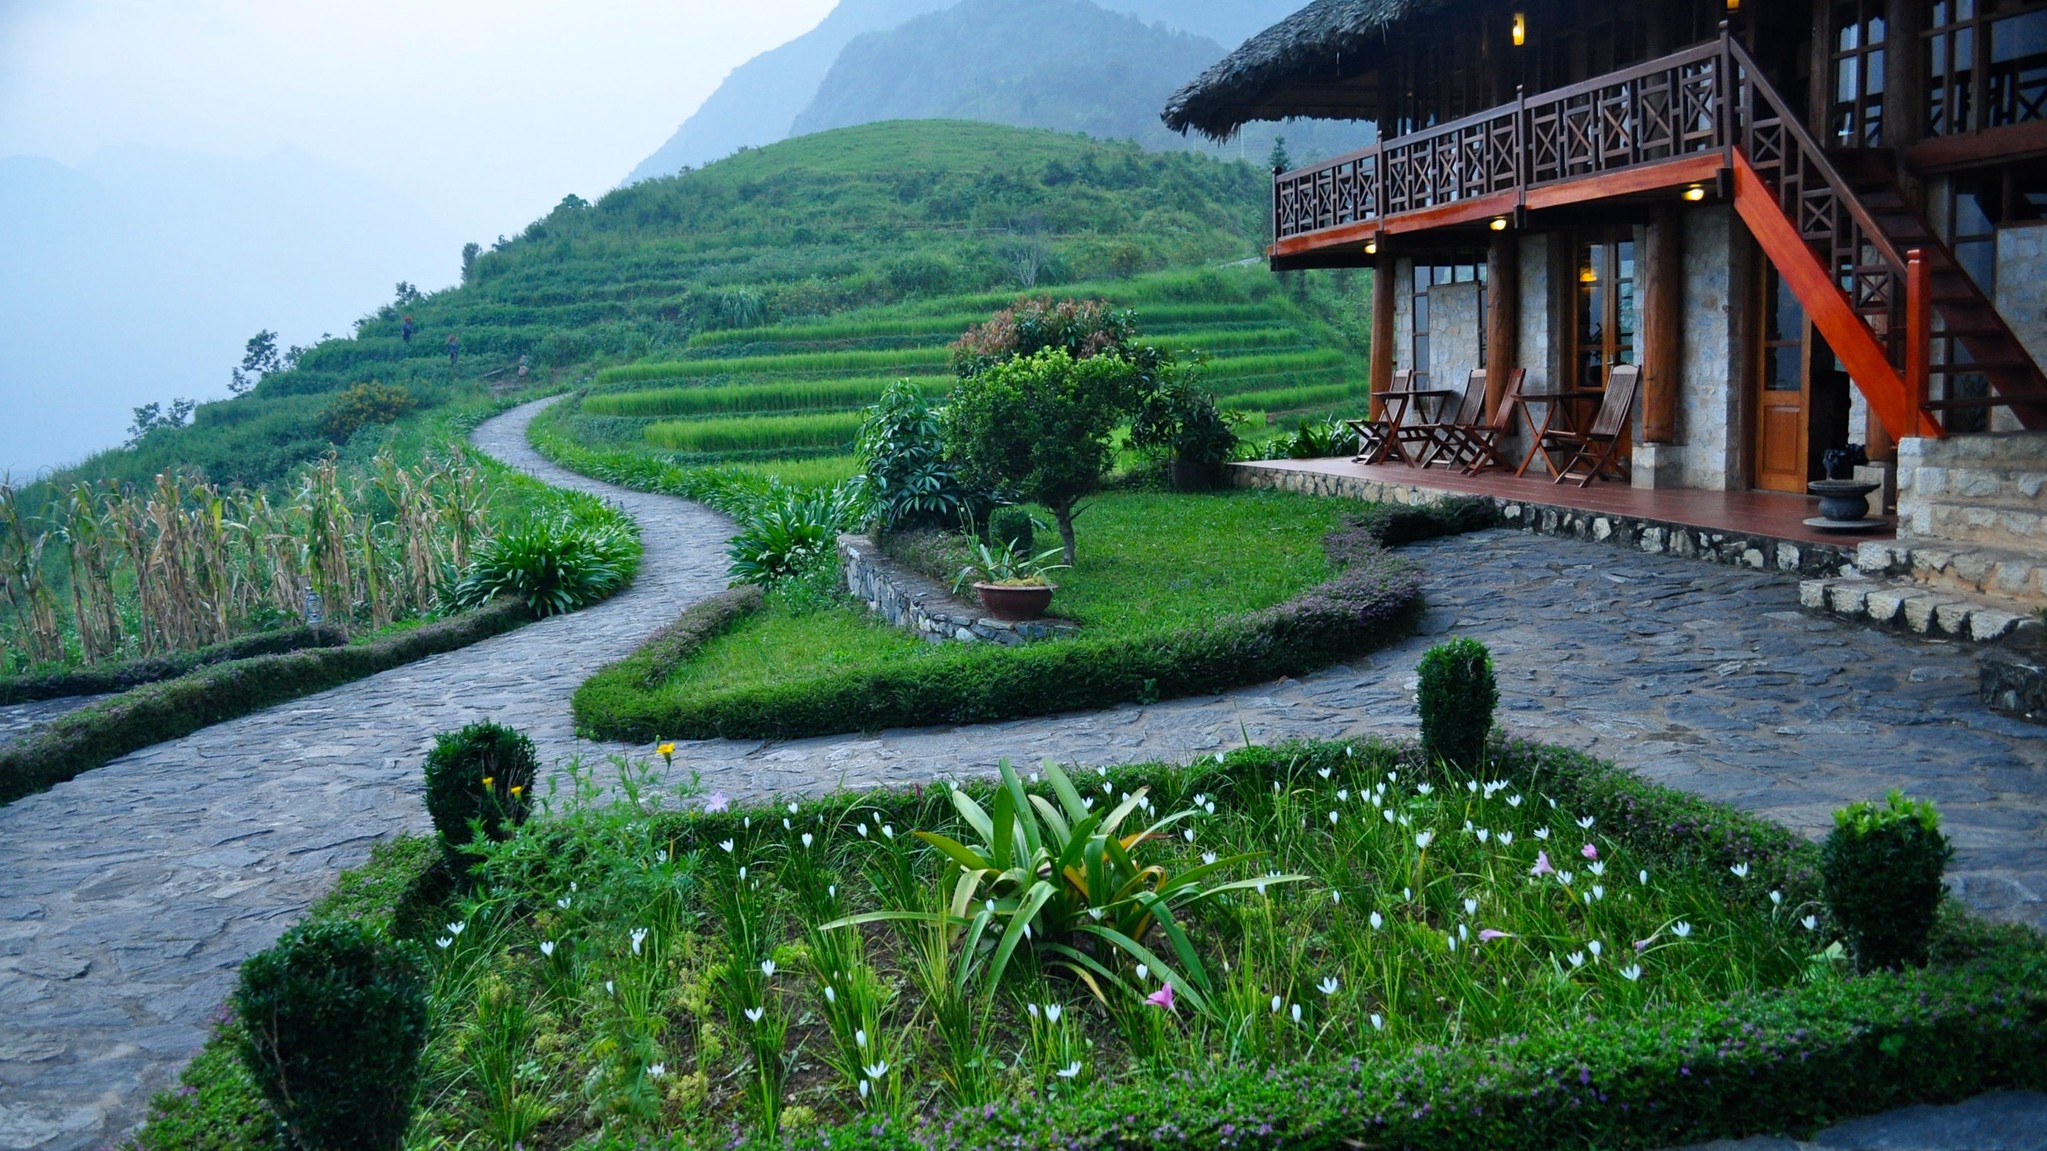 <p>Located in the hills of Vietnam’s Sapa Valley, Topas Ecolodge provides stunning views of the Hoang Lien National Park. This lodge features 33 granite bungalows that overlook beautiful mountain peaks and rice farms. </p>  <p>There’s <strong>no TV or Wi-Fi here</strong>, and the lodge has a top-notch recycling program and reduces food waste by providing leftovers to local livestock. The lodge also uses meat and vegetables from its own farm.</p>